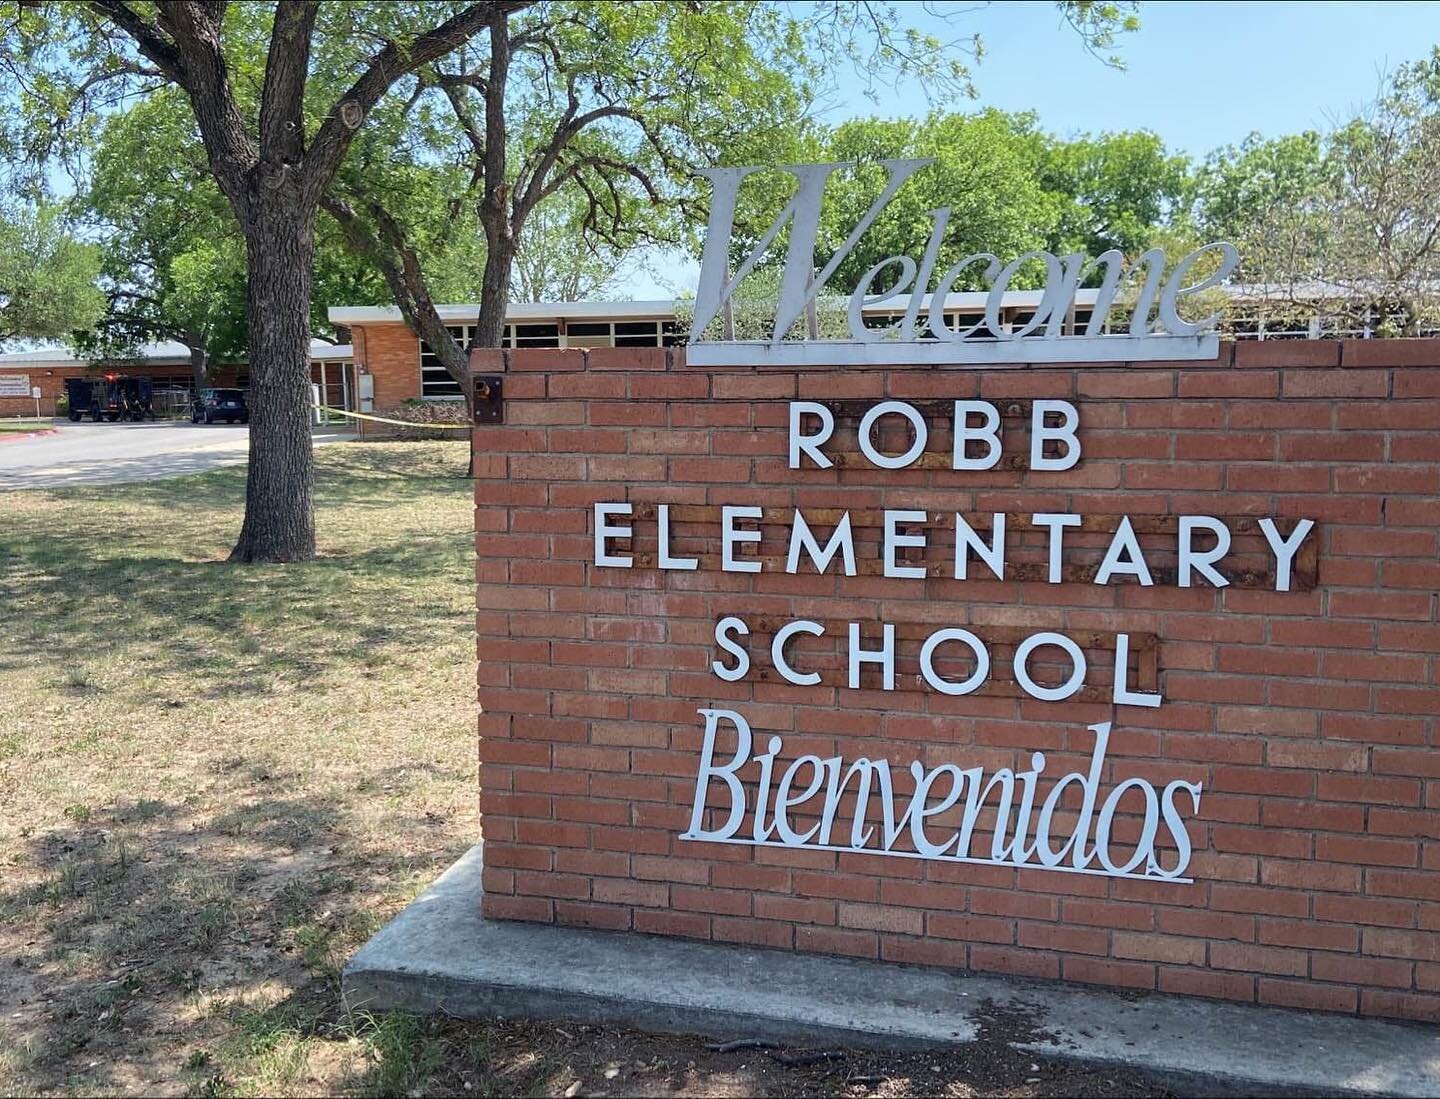 As I parent, a can only imagine the pain of losing one of my children. As a teacher, I can only imagine losing one of my students. Tonight there are teachers and parents in the Uvalde community that are having to live through just that reality. My he